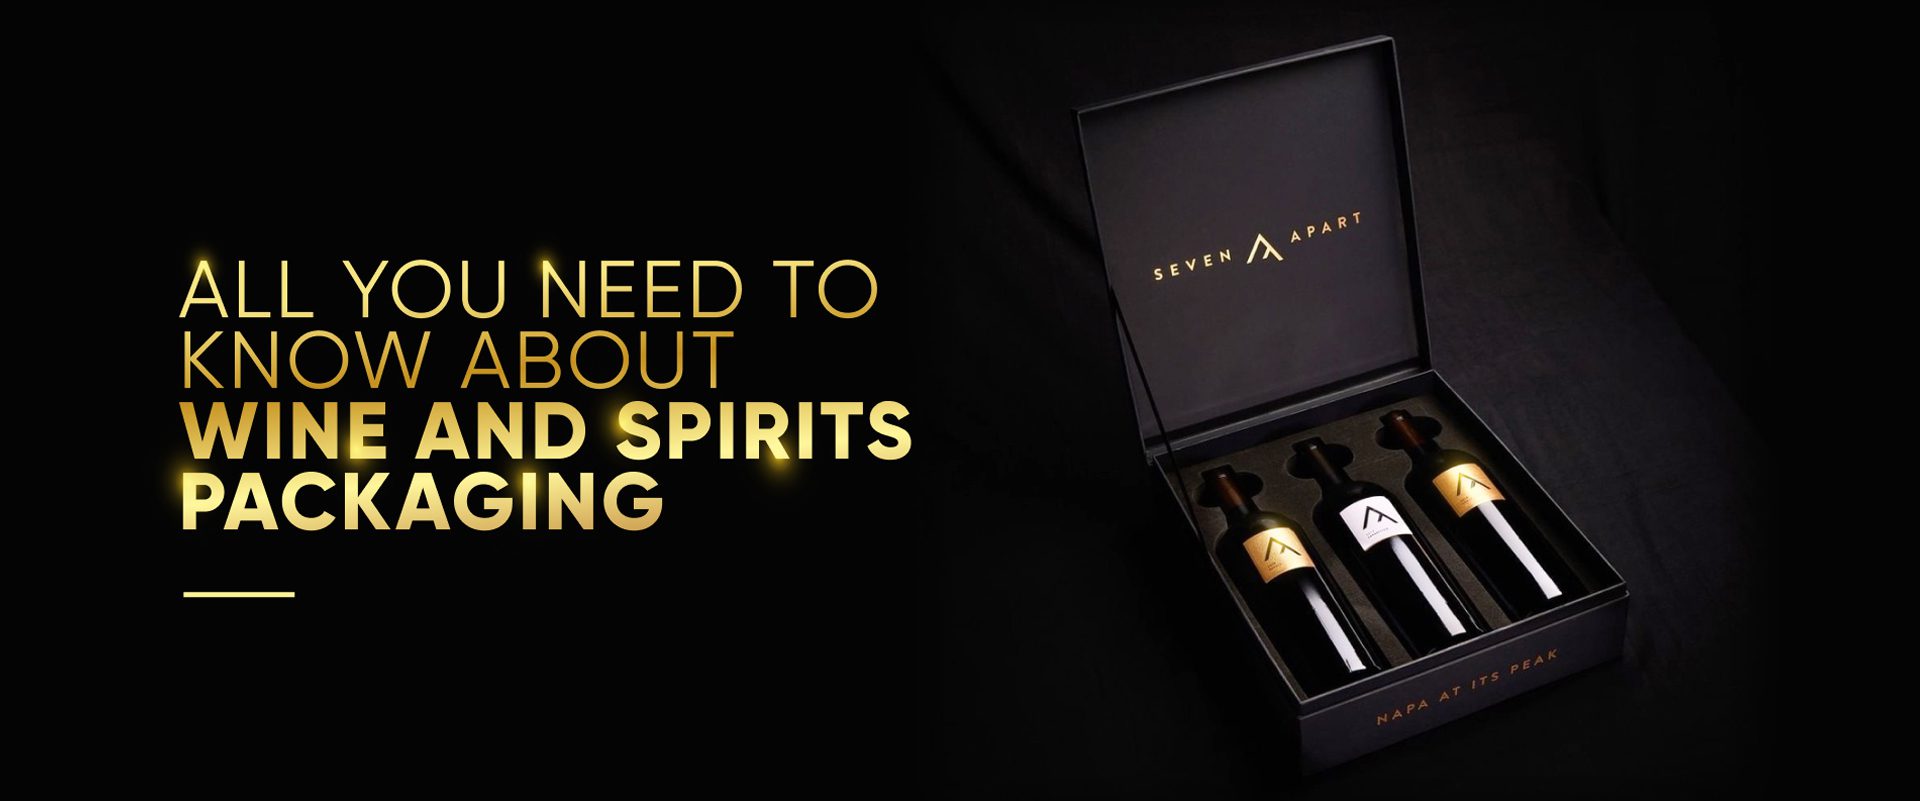 All You Need to Know about Wine and Spirits Packaging